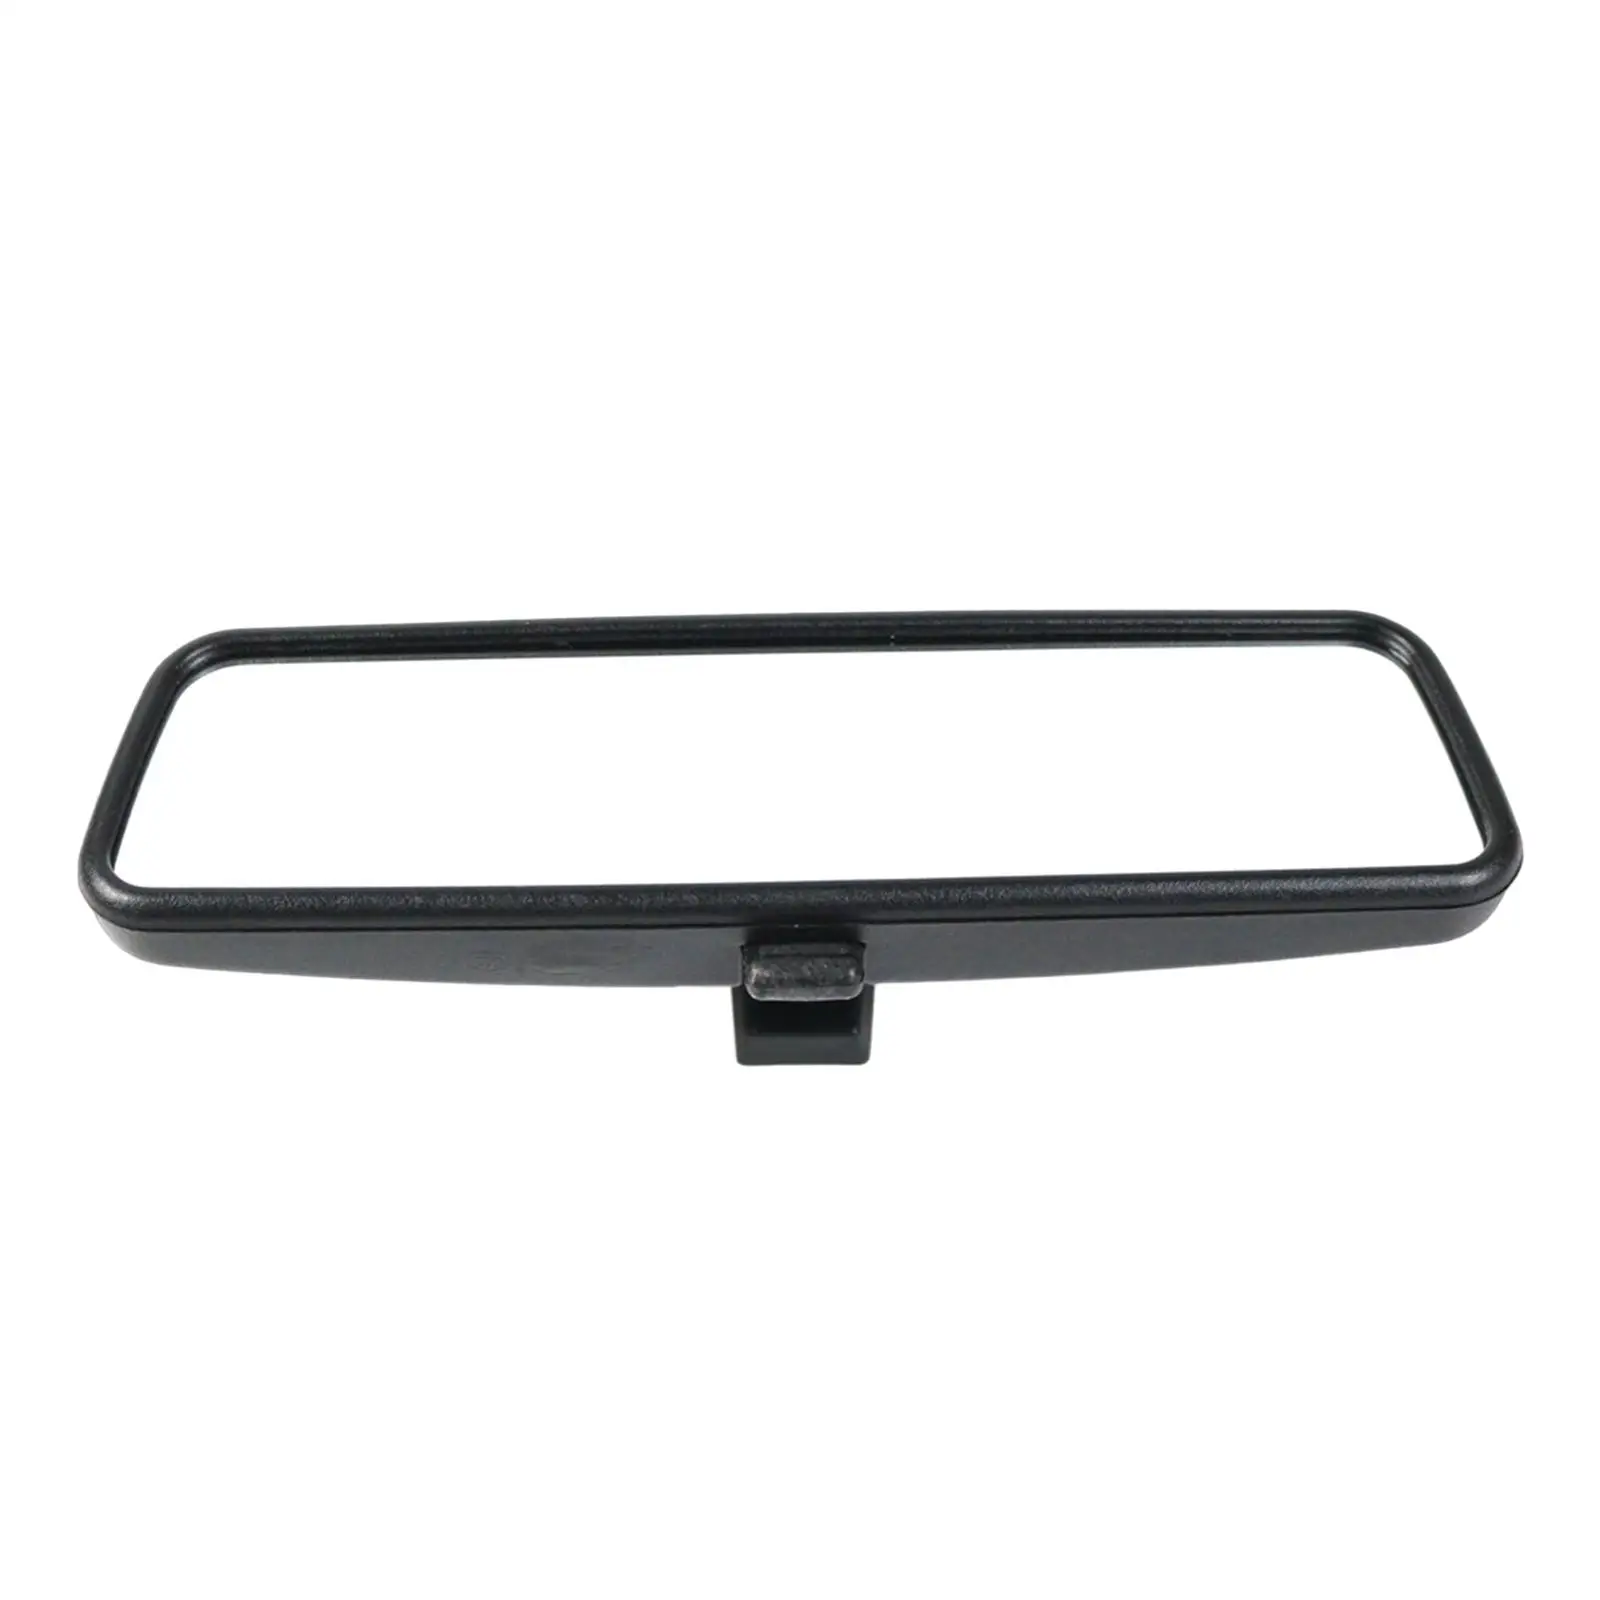 Interior Rear View Mirror 814842 Rearview Mirror for Citroen C1 High Performance